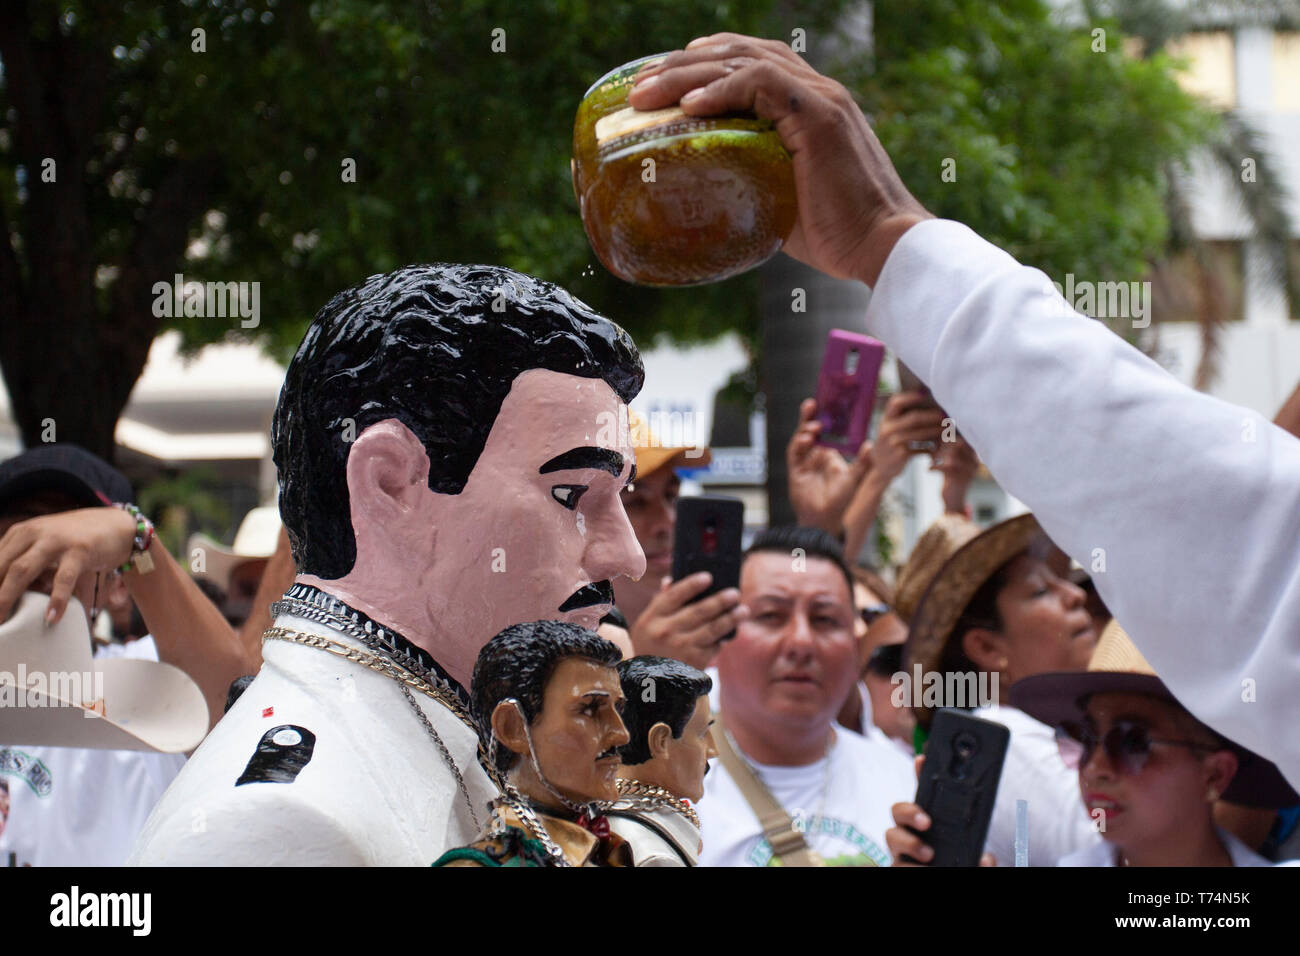 Culiacan, Mexico. 03rd May, 2019. Believers pour whisky over the bust of Jesus Malverde, who is considered a saint of drug bosses in Mexico. On the occasion of his 110th anniversary of death on 03.05.2019 numerous faithful gathered in his native town in the federal state of Sinaloa. Malverde, who is not recognized as a saint by the Catholic Church, is said to have been a highwayman during his lifetime. Many Mexicans worship him as a kind of Robin Hood. According to oral tradition, he robbed the rich families in the Sinaloa region and then distributed the booty among the poor. Credit: dpa pictu Stock Photo